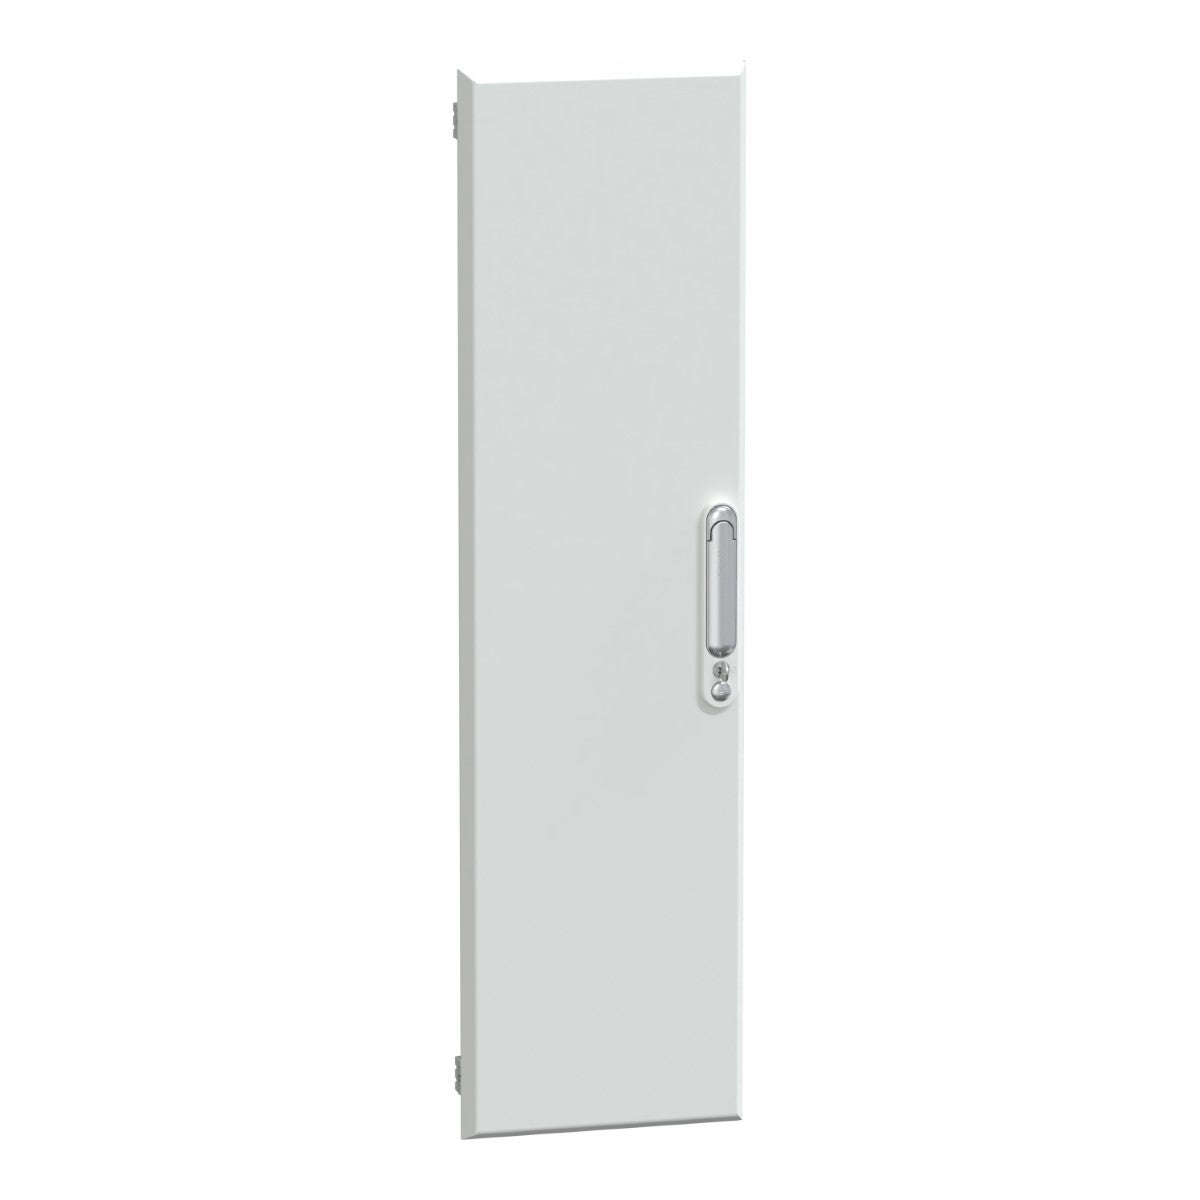 Door, PrismaSeT G, plain type for duct, 21M, W300, IP30, white, RAL 9003